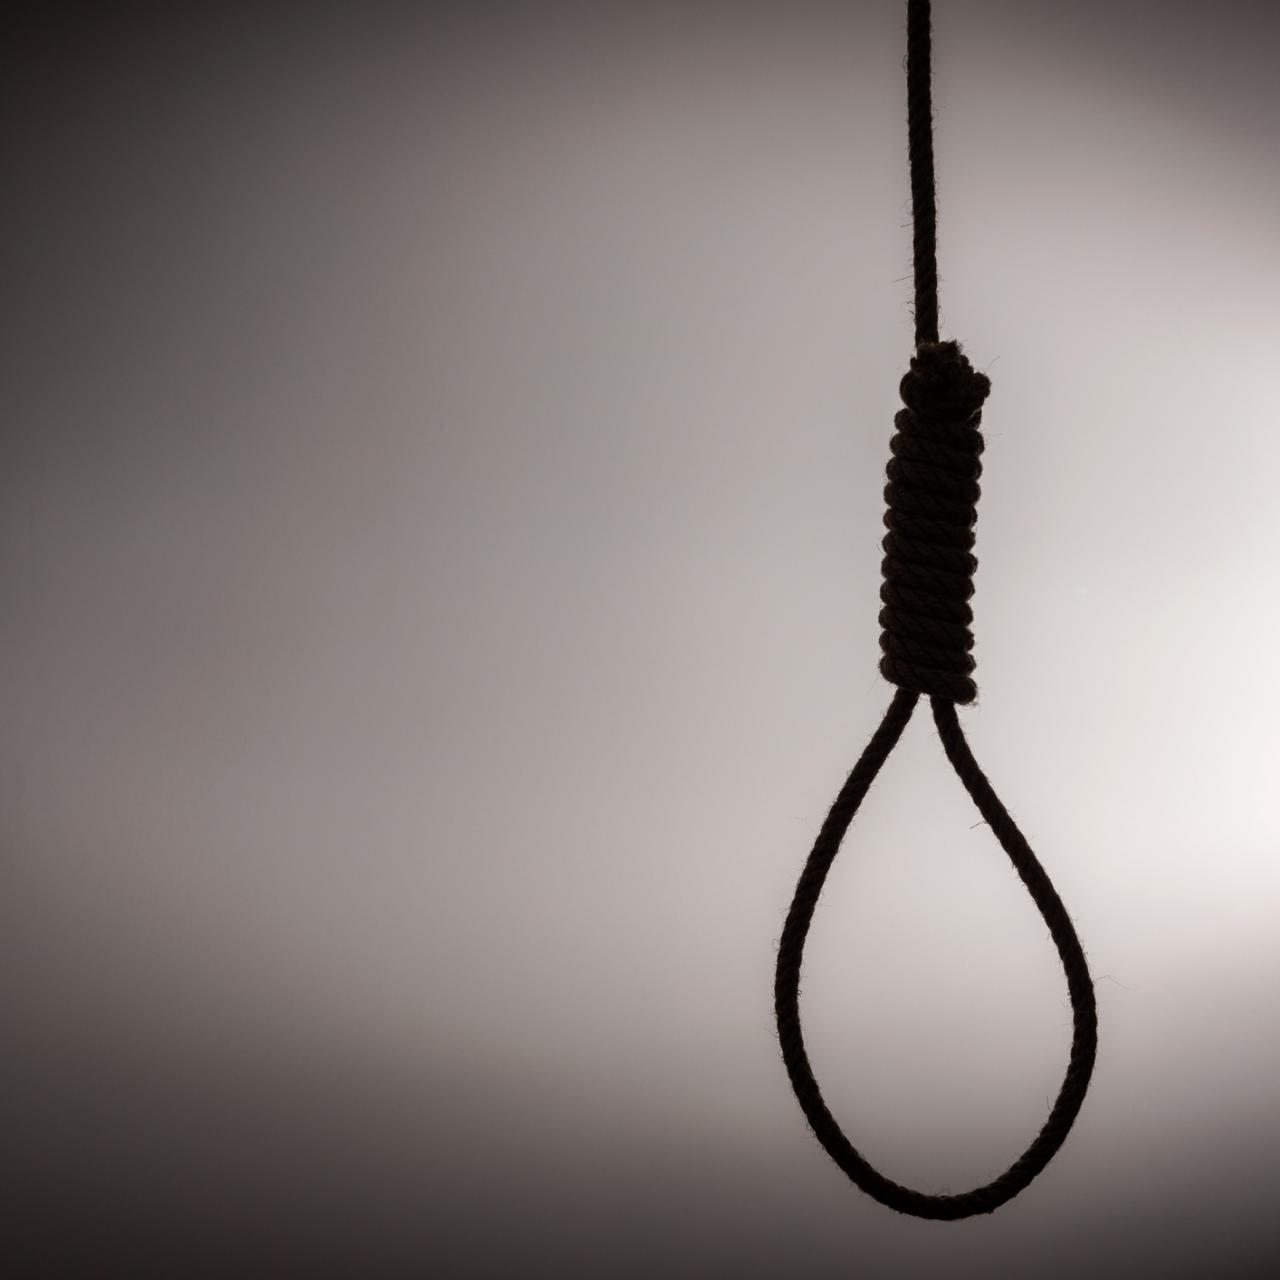 Does The Hangman's Noose Really Possess Magical Occult Powers